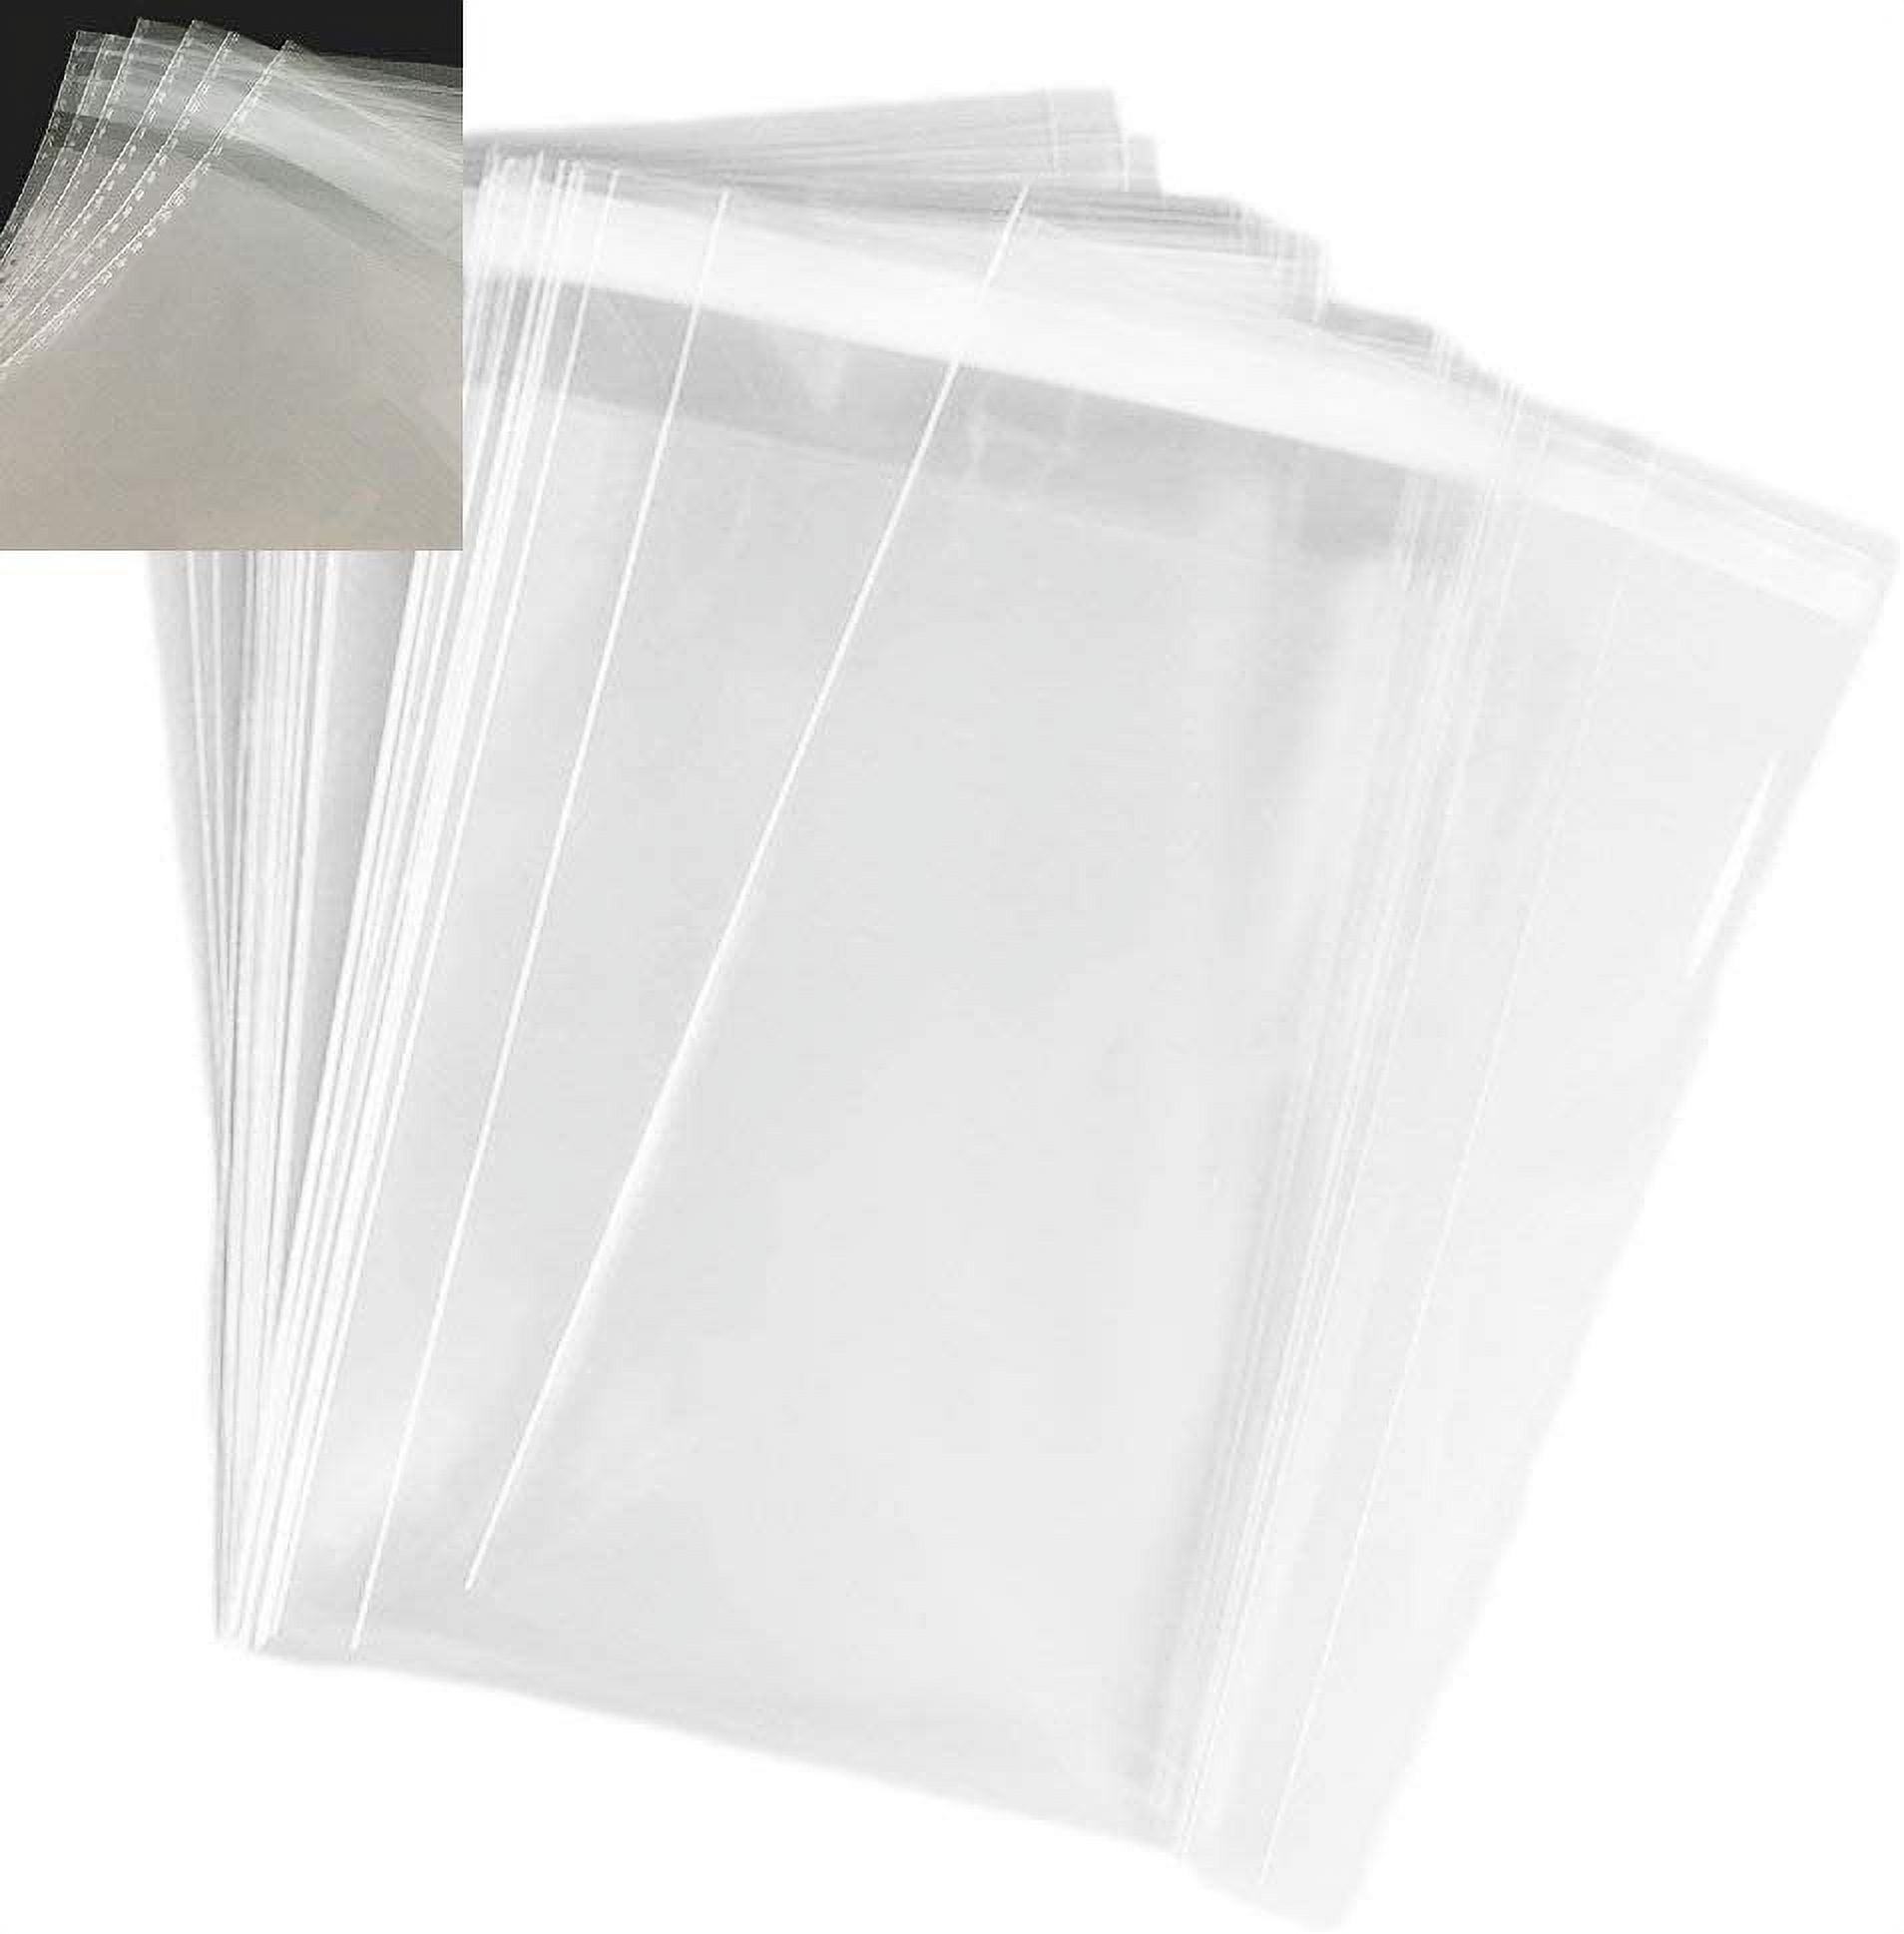 25 count of Clear Plastic Bags 10 x 16